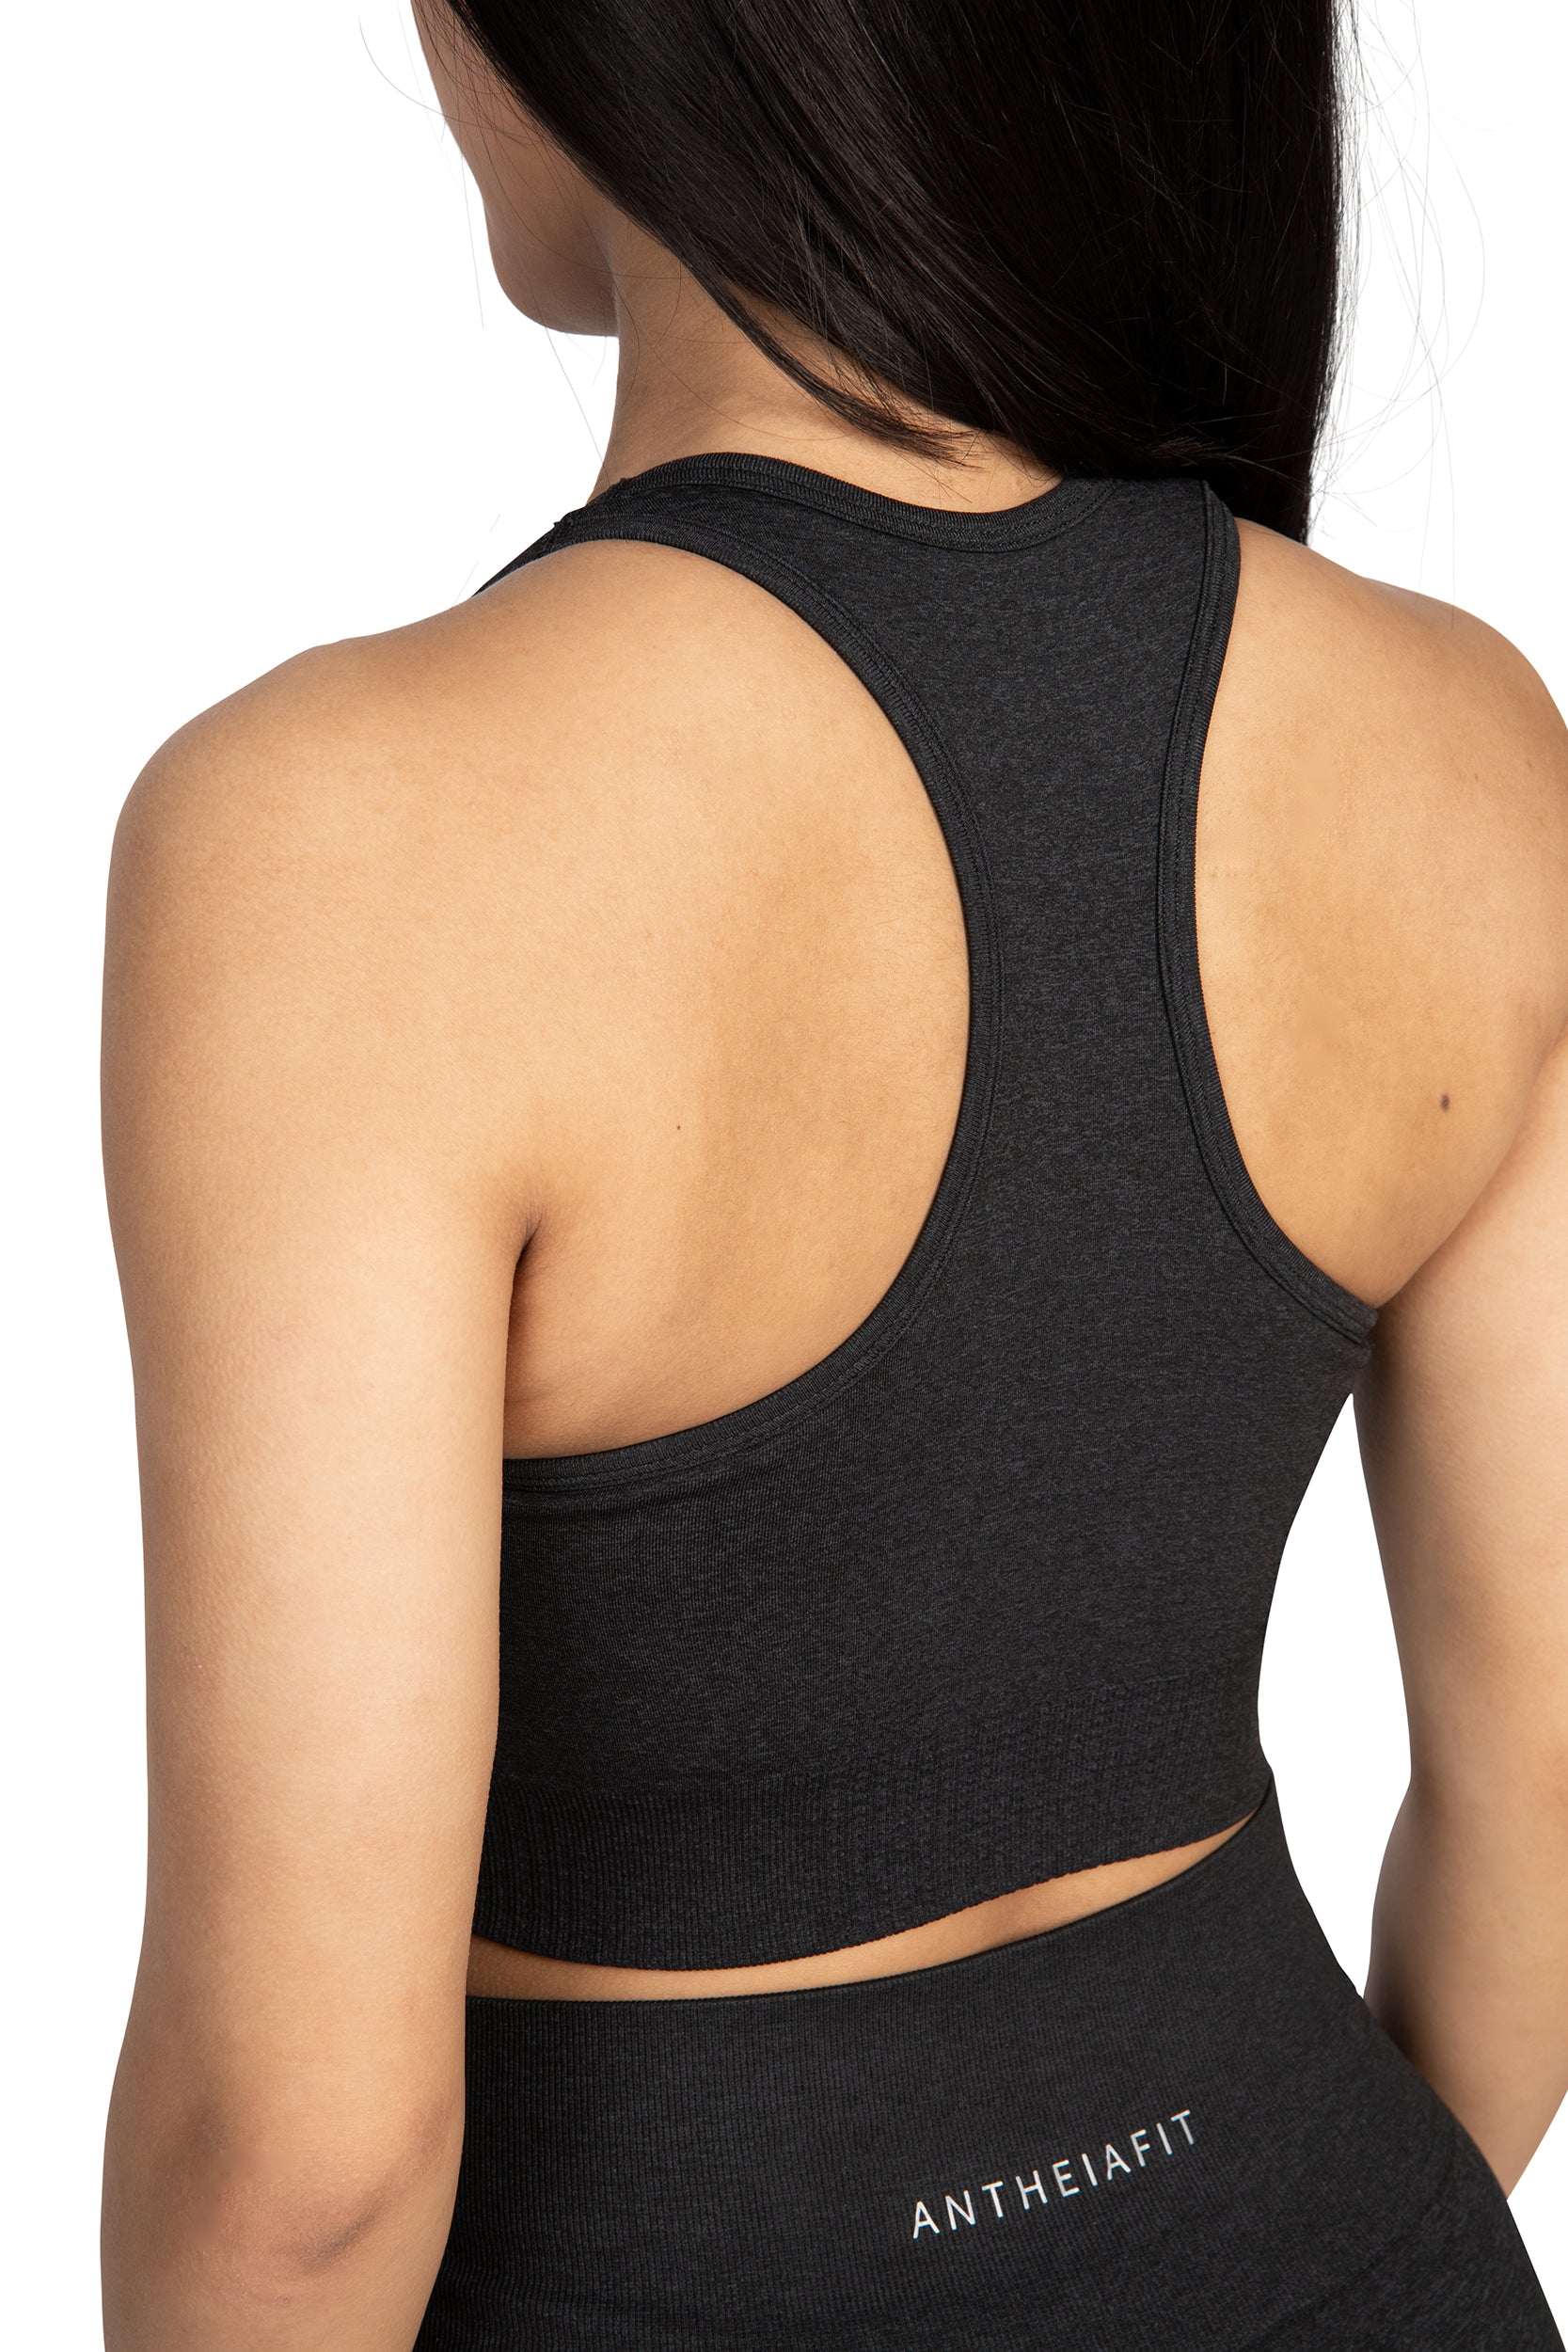 Pro-Fit Seamless Sports Bra Black - $14 (60% Off Retail) - From Victoria